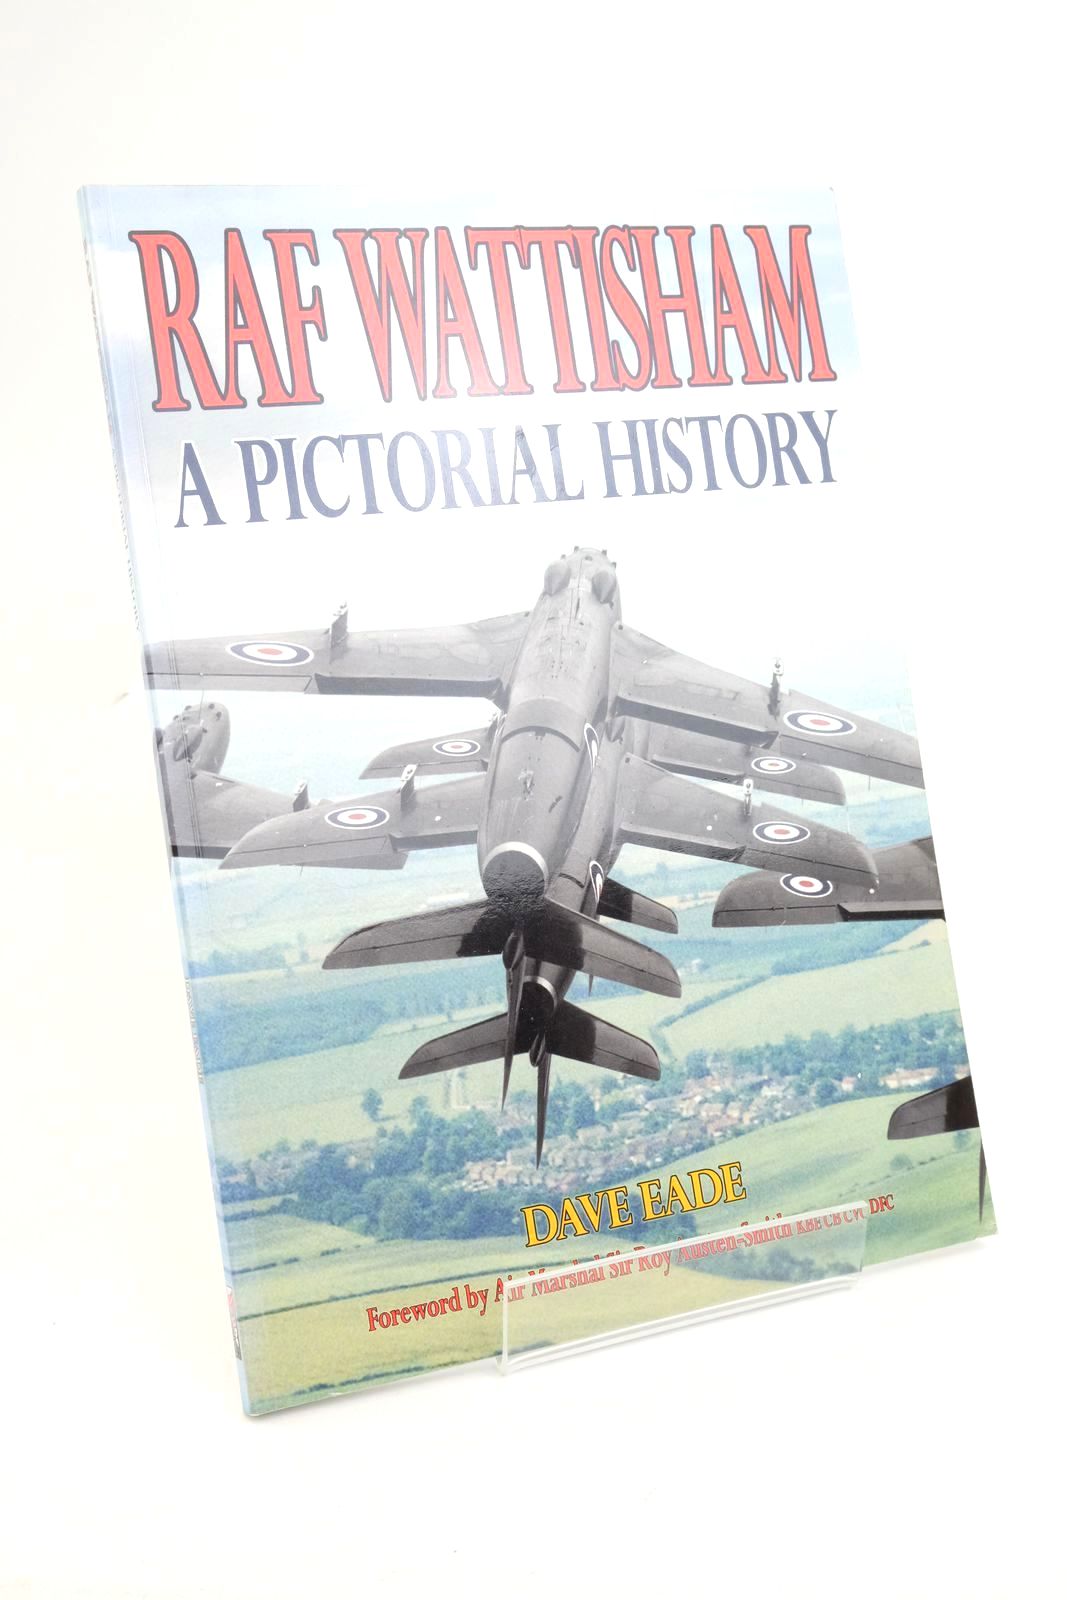 Photo of RAF WATTISHAM A PICTORIAL HISTORY written by Eade, Dave Austen-Smith, Roy published by Ad Hoc Publications (STOCK CODE: 1322186)  for sale by Stella & Rose's Books